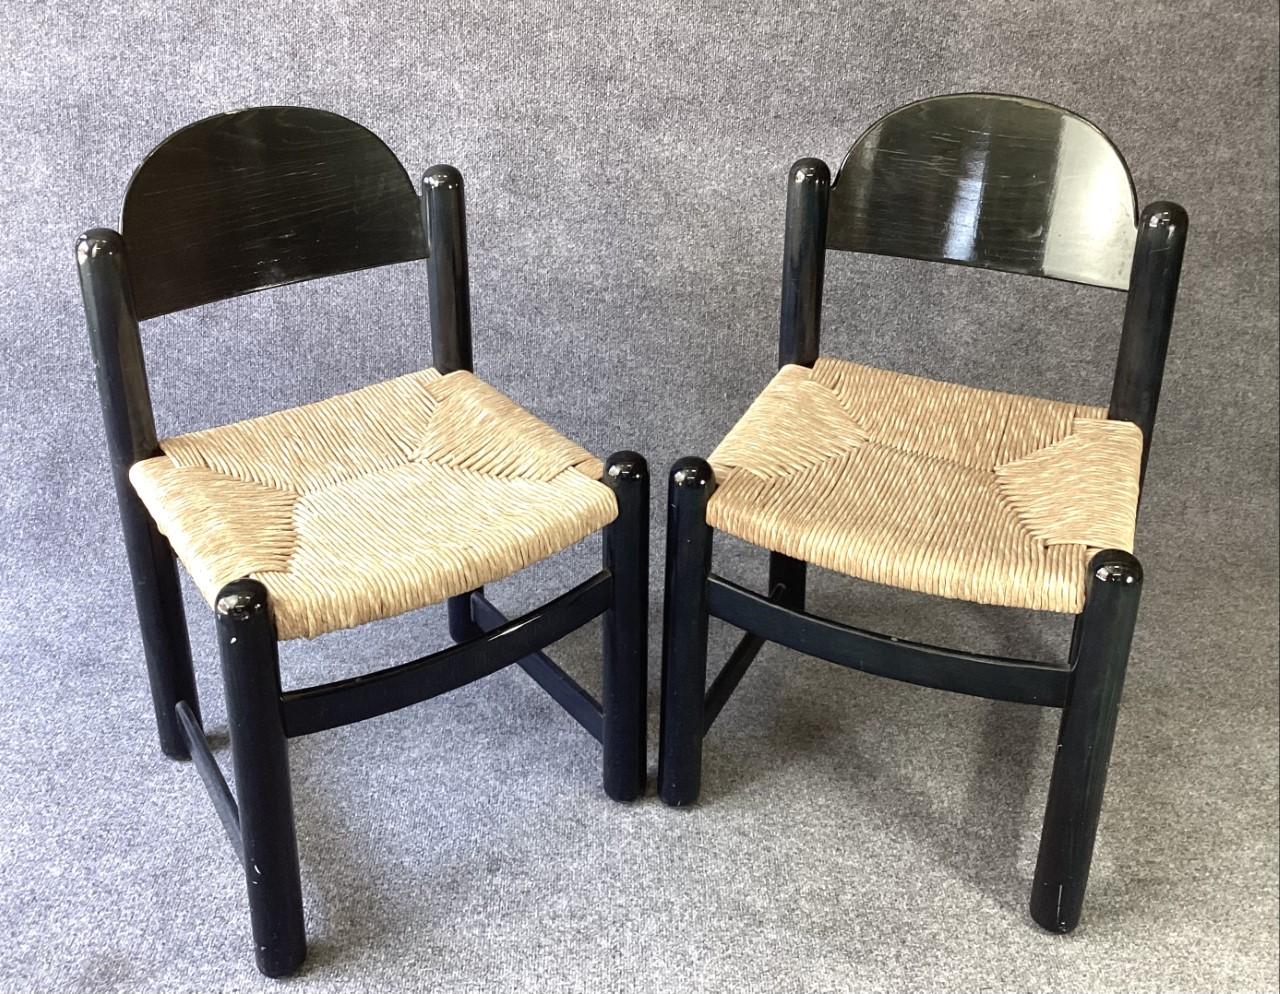 A very cool paper of very well preserved side chairs attributed to the iconic master designer, Vico Magistretti. These super stylish chairs have solid beech wood fames with a dark blue/green dyed-color and a stain sheen protective finish. The seats